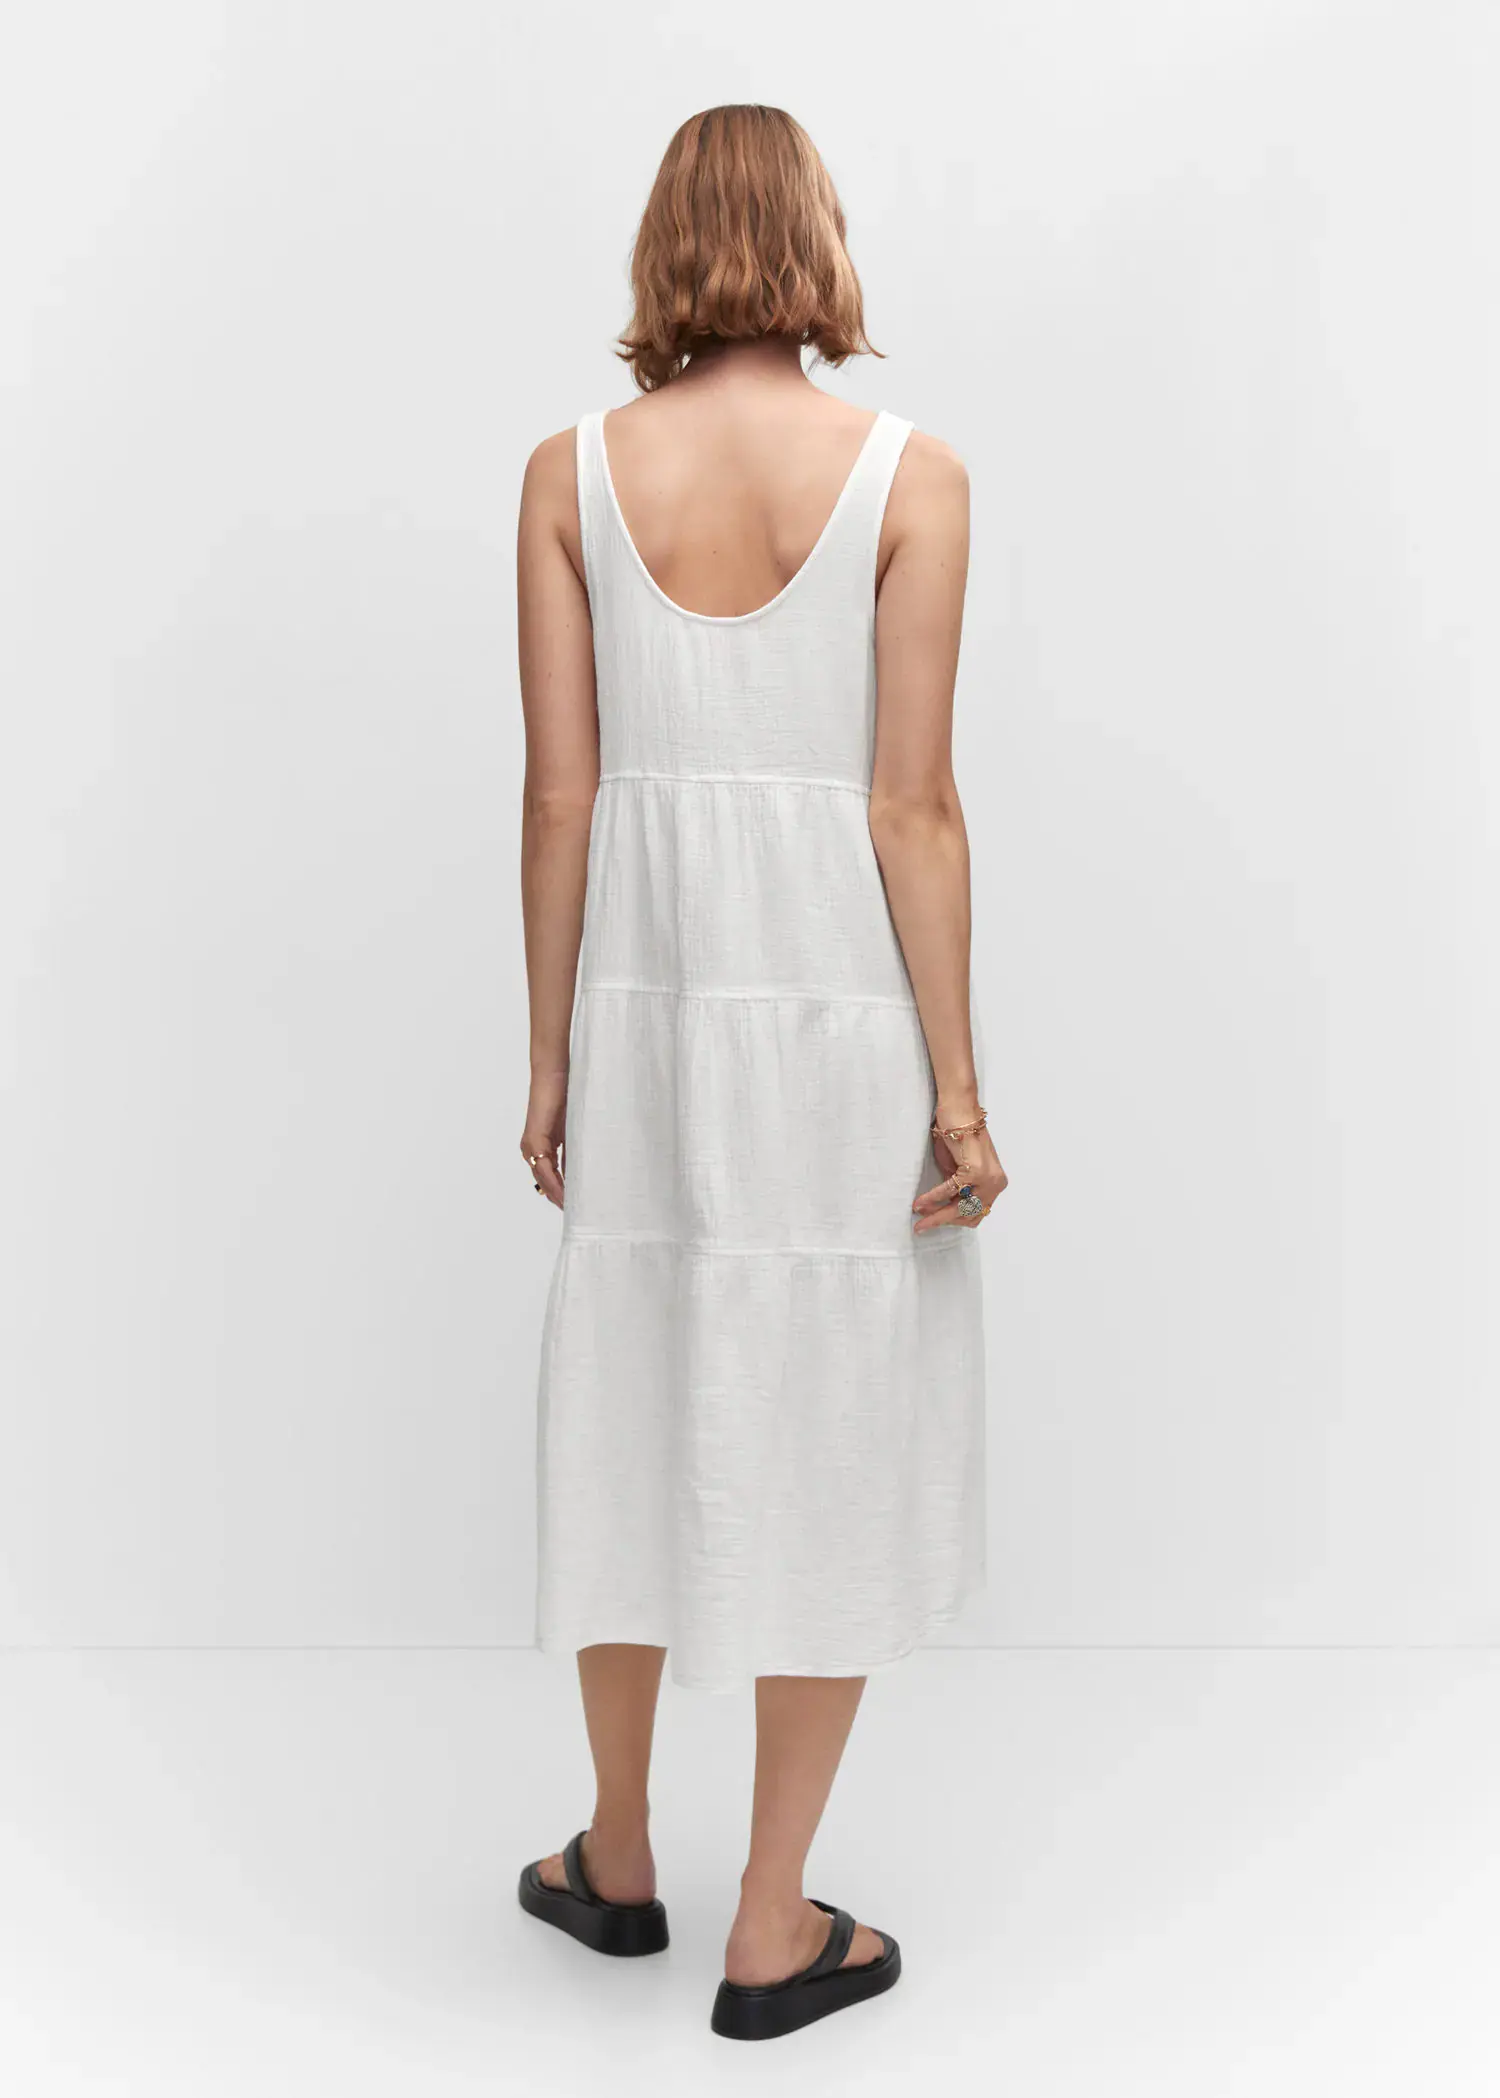 Mango Flared cotton dress. a person wearing a white dress standing in a room. 